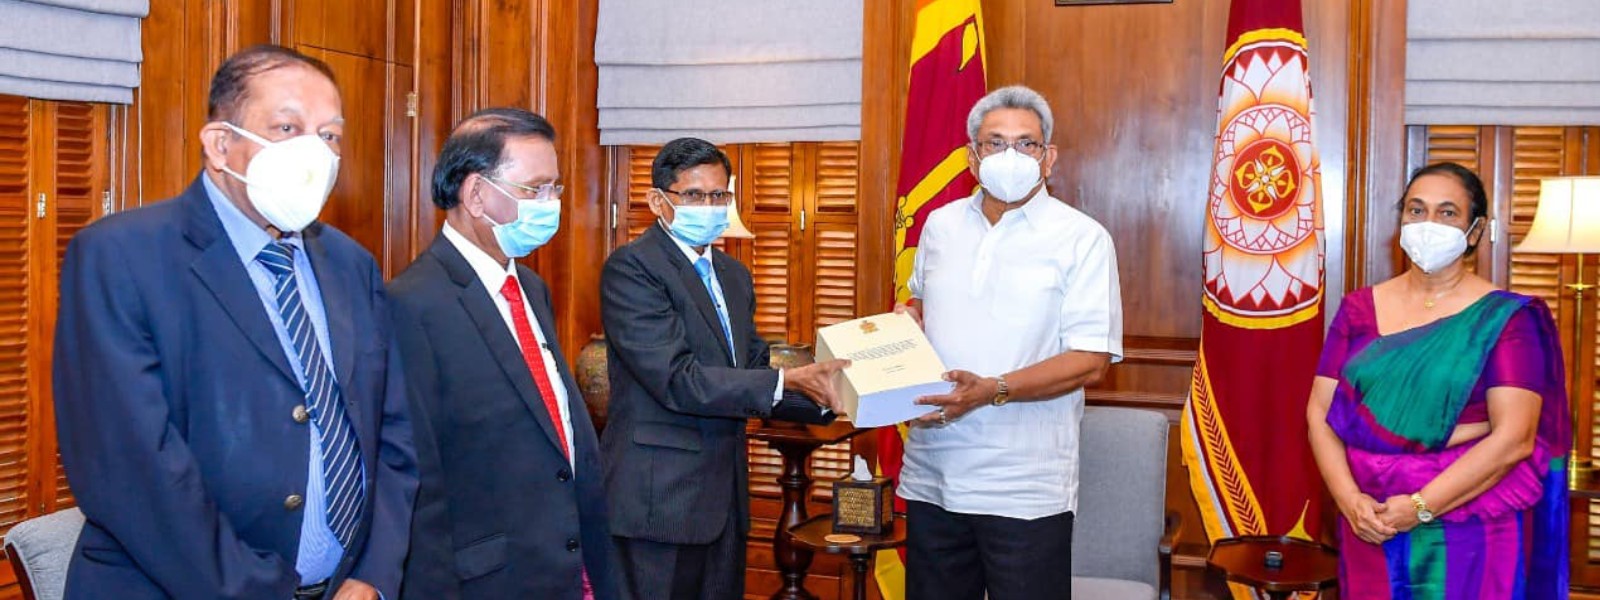 Final Report by PCoI on Political Victimization handed over to President